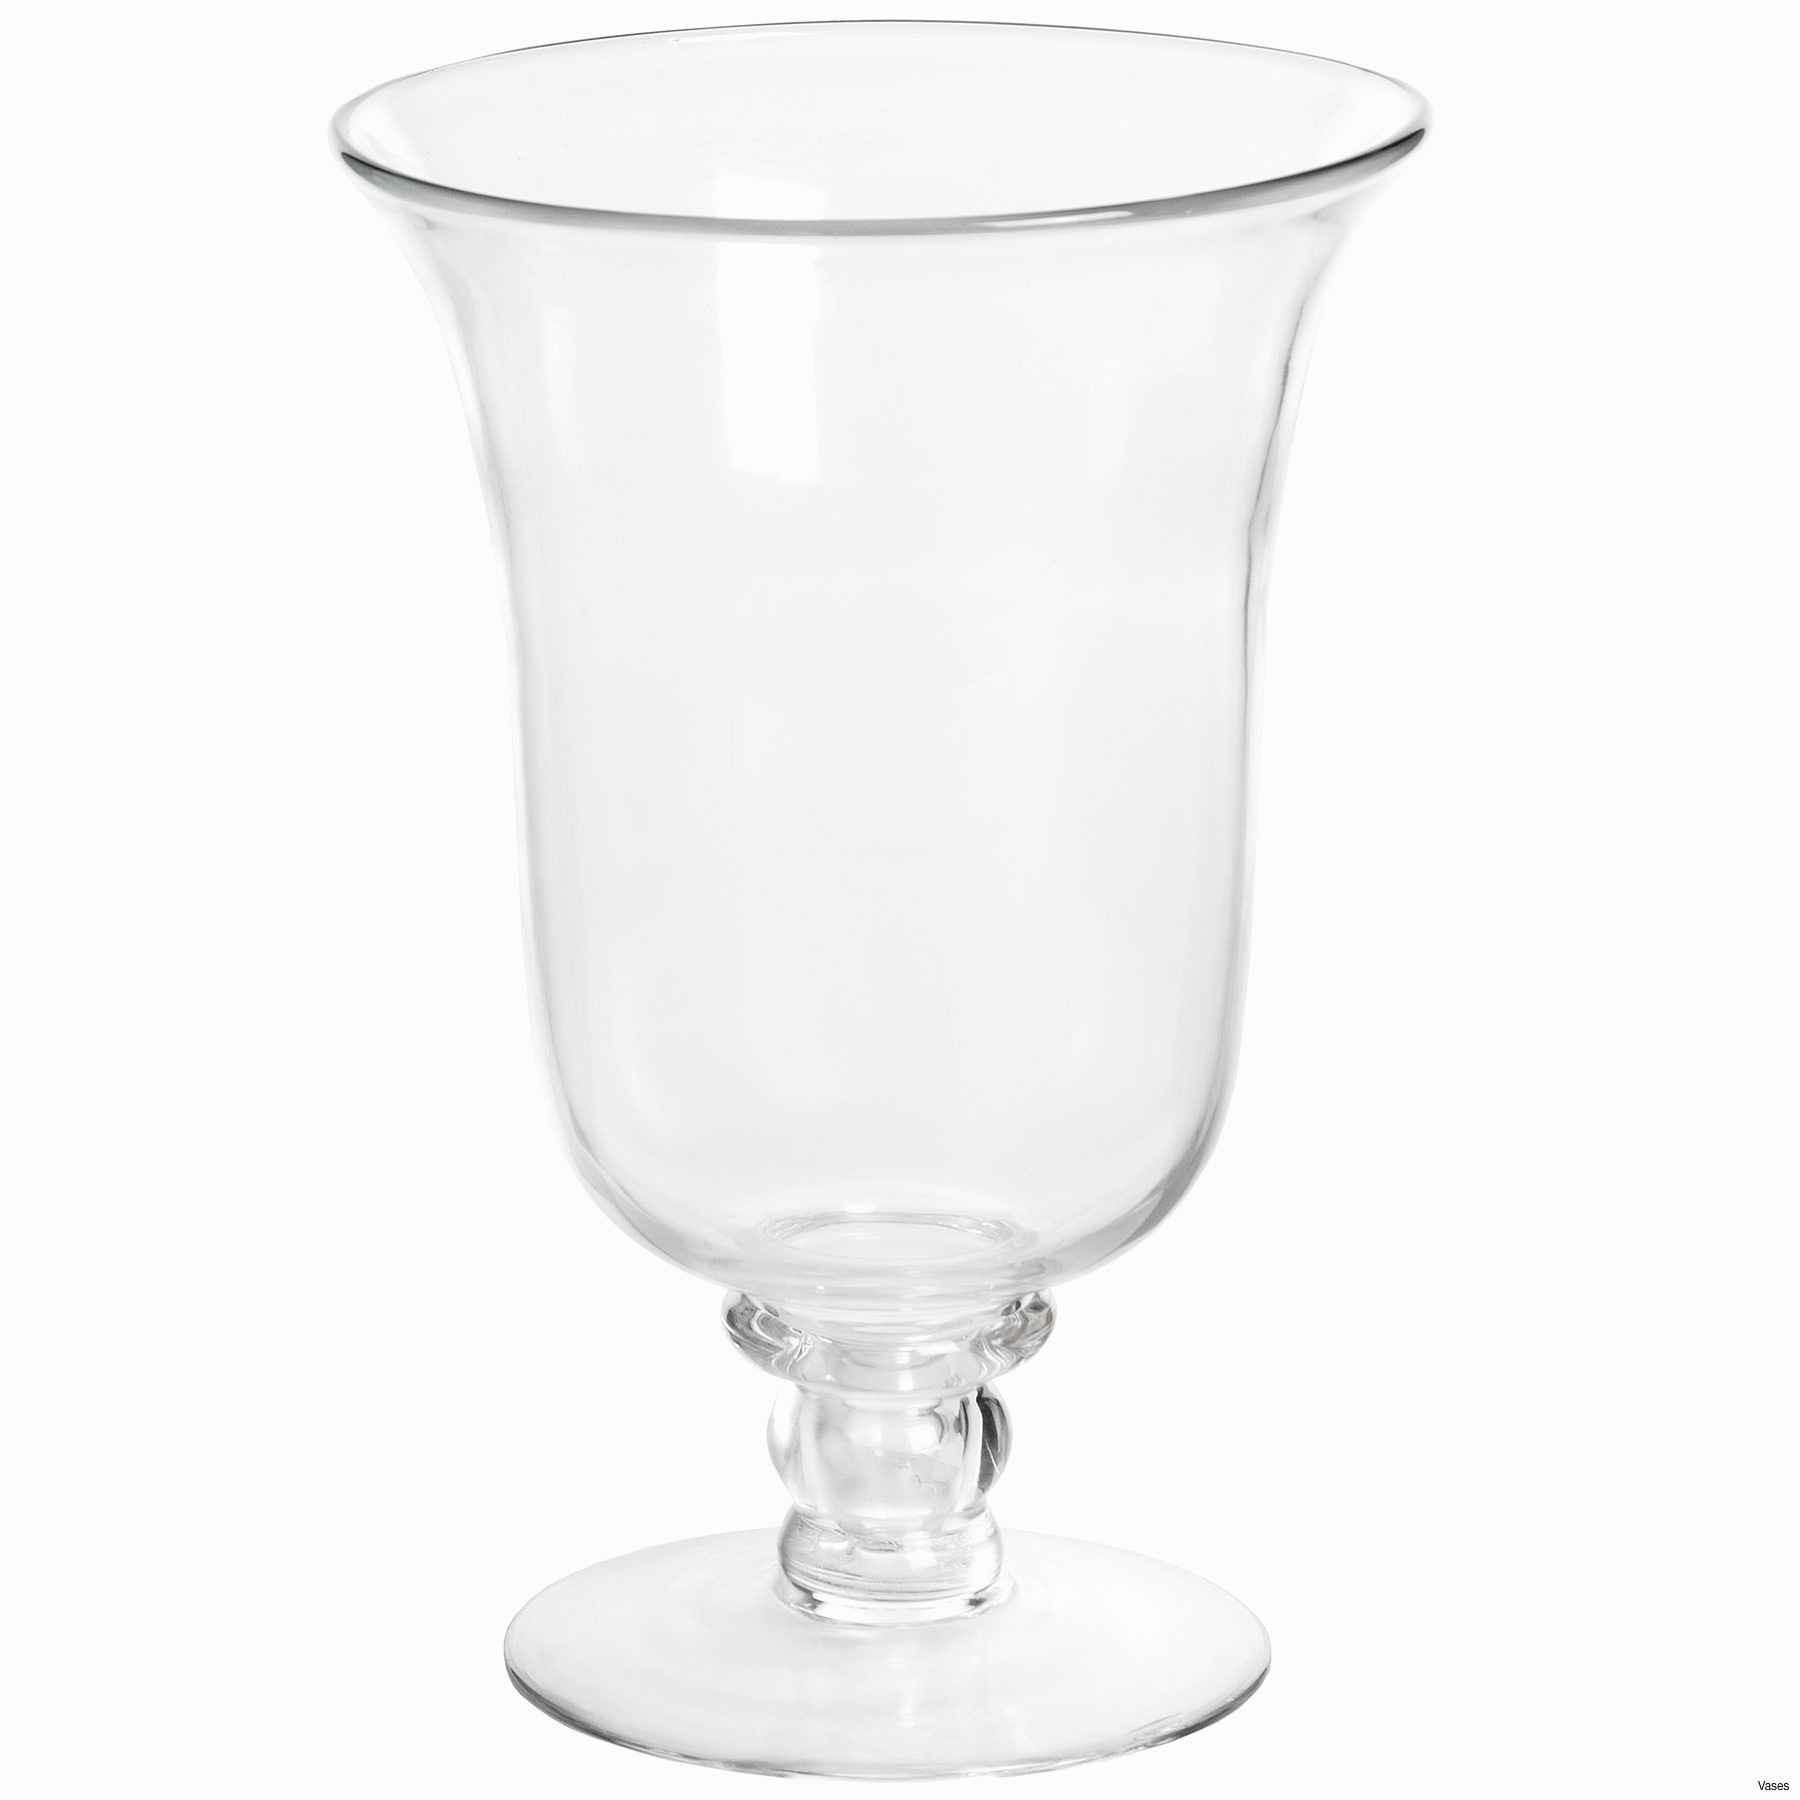 11 Ideal Cheap Glass Vases for Wedding 2022 free download cheap glass vases for wedding of candle stands wholesale lovely faux crystal candle holders alive with regard to candle stands wholesale lovely faux crystal candle holders alive vases gold t